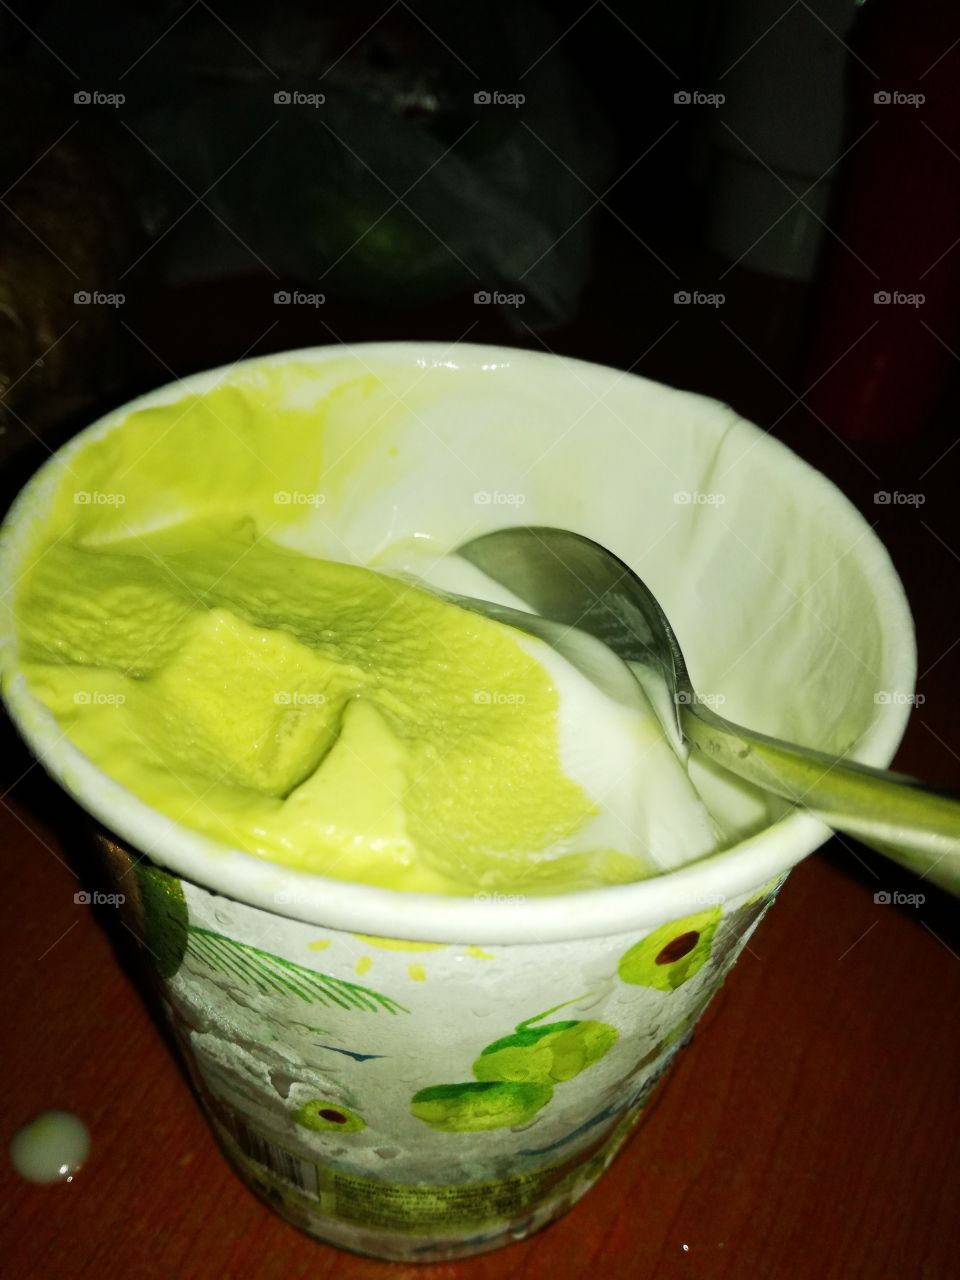 Celebrating wedding anniversary alone! 😝 After a bottled of cold beer, let's have some ice cream! Buco Avocado swirl! 🥑🍦